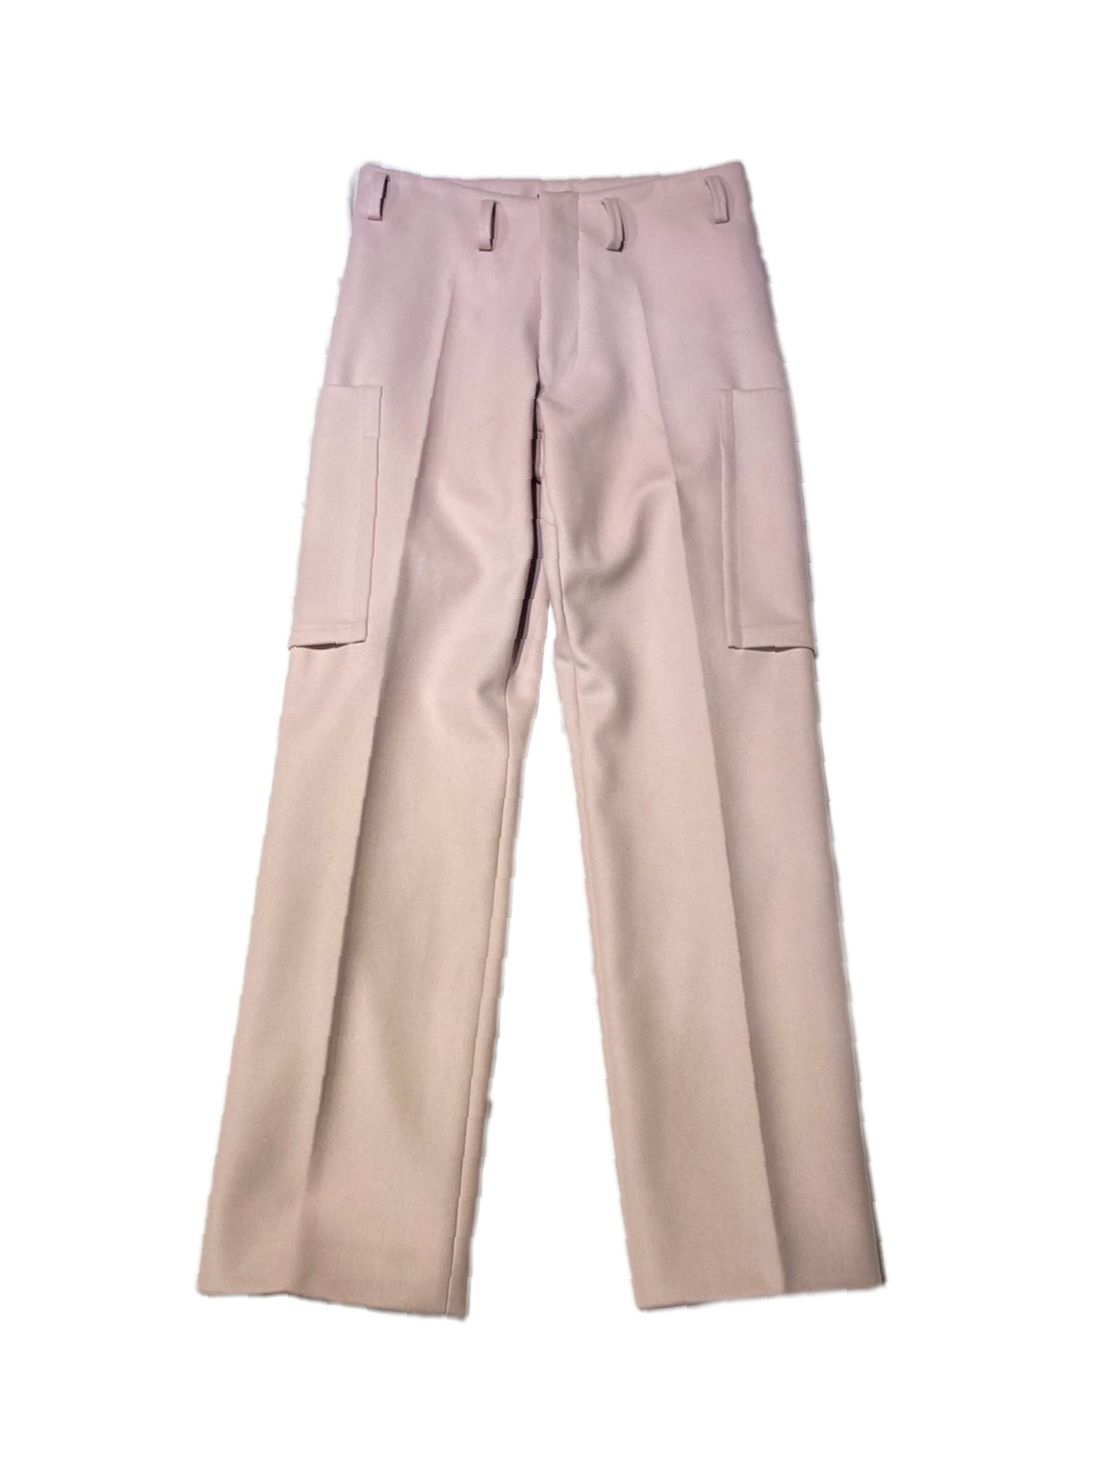 Omar Afridi 5pkt Trousers 22AW | kensysgas.com